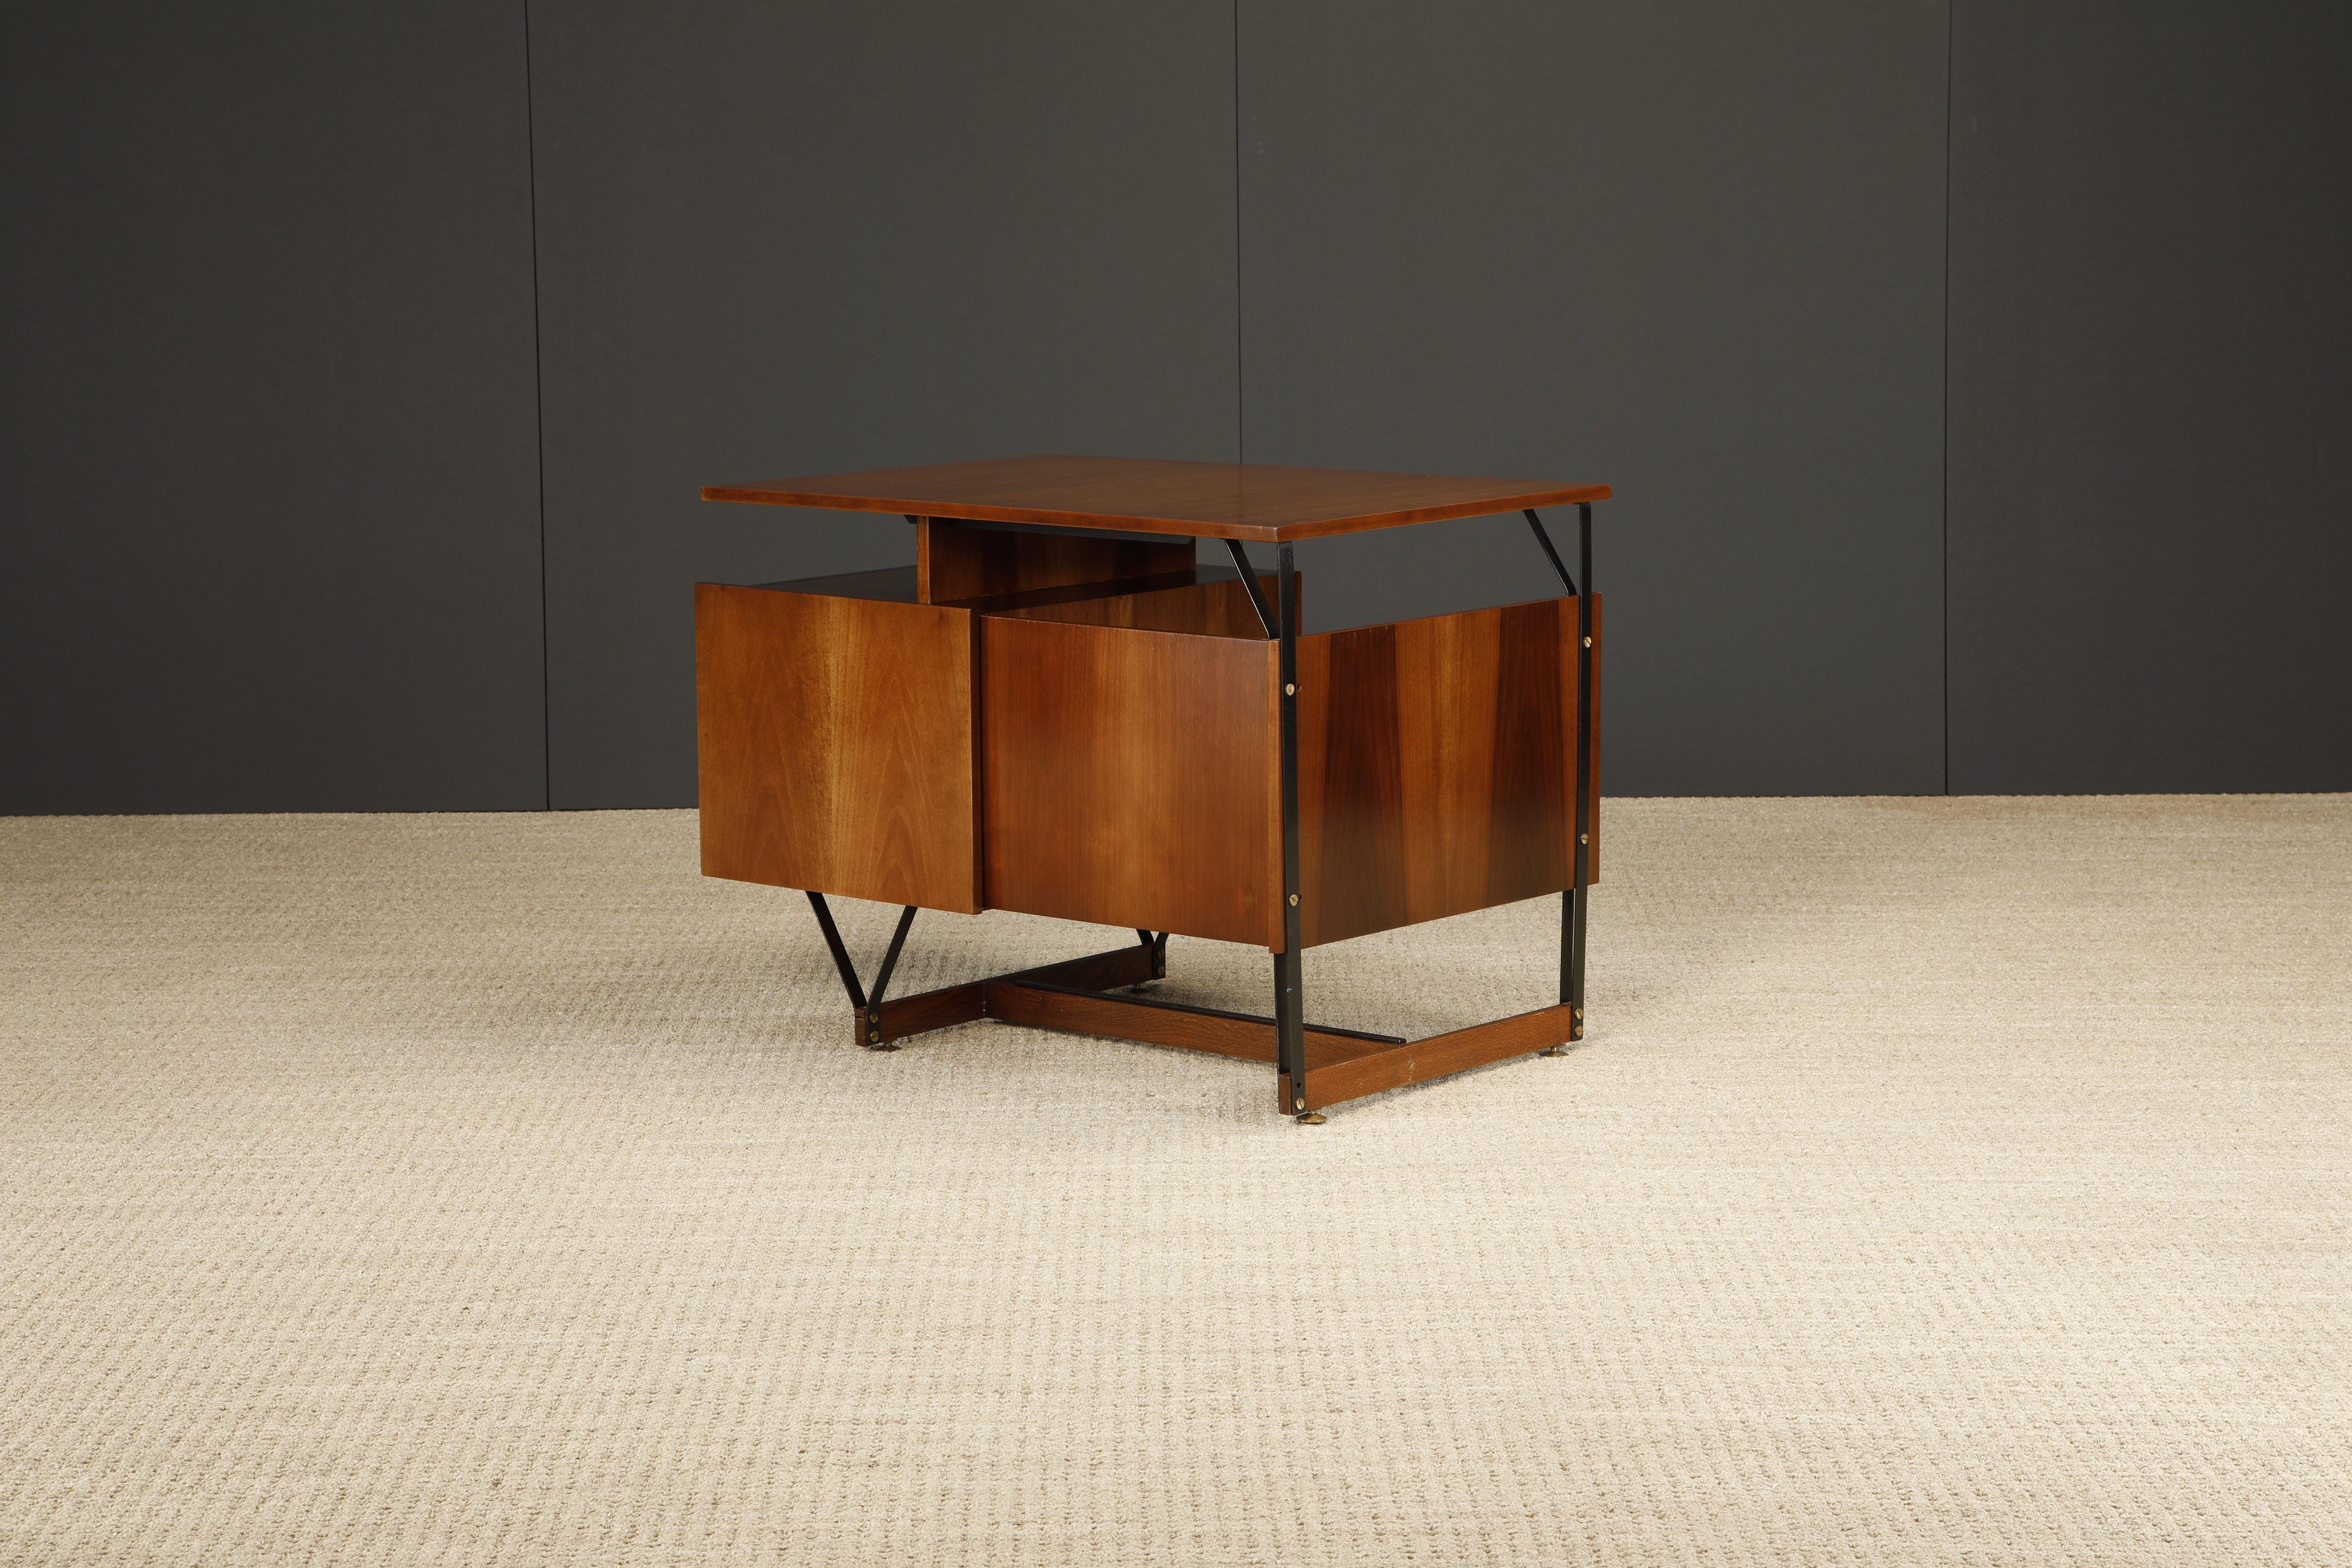 Italian Mid-Century Modern Desk, Style of Gio Ponti, c 1950s, Refinished For Sale 4